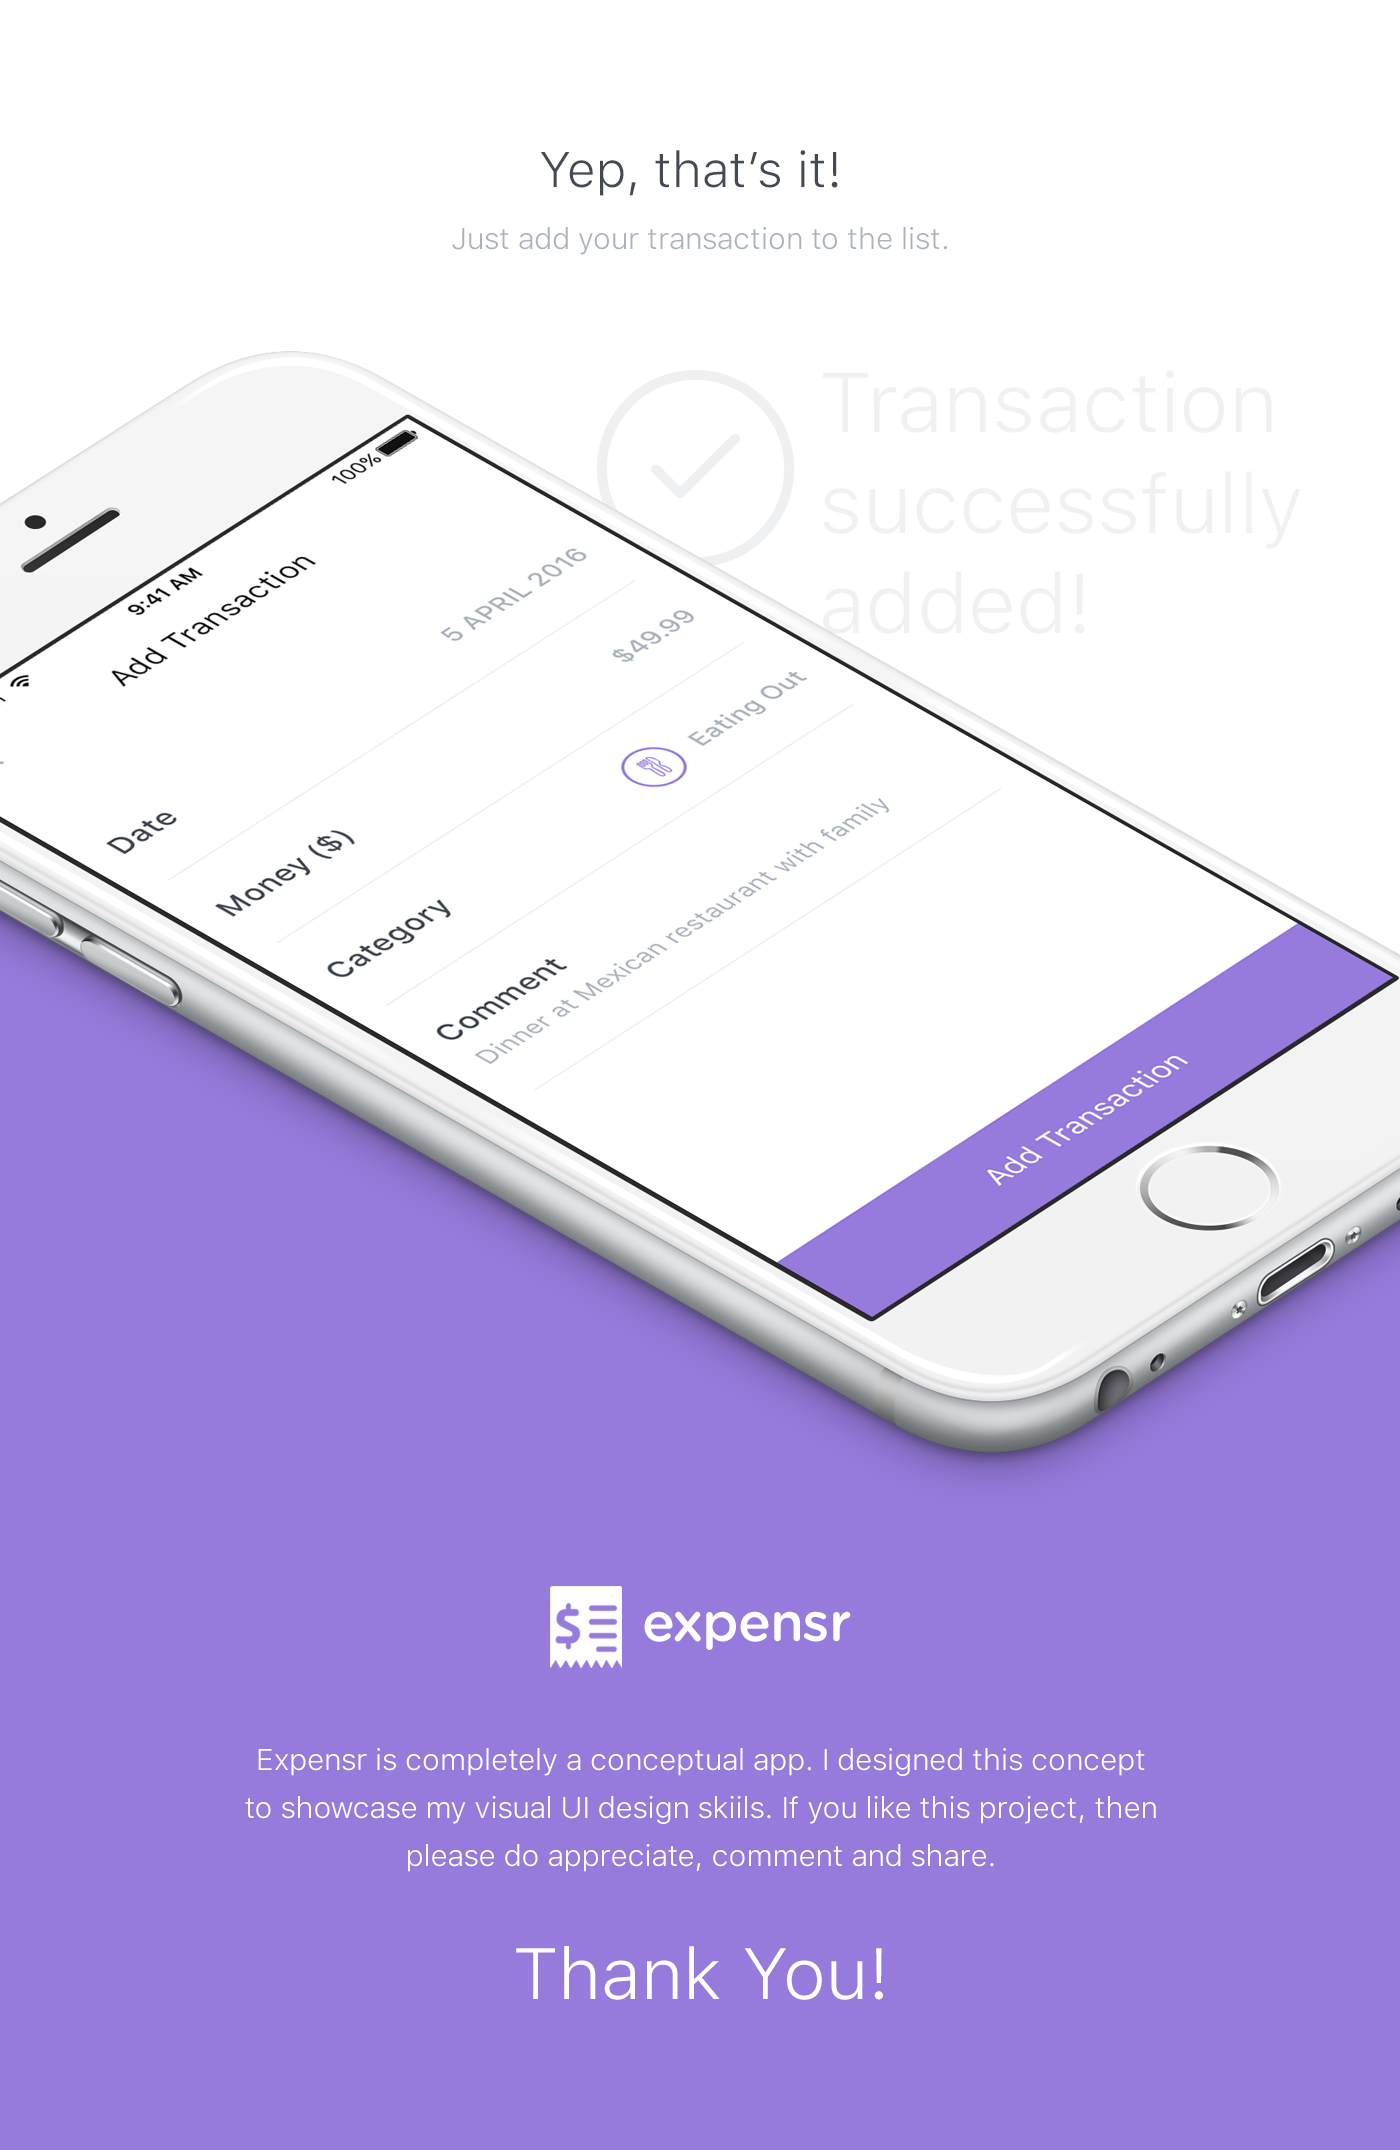 expensr app ios concept expense tracker expense iphone UI ux apple expense manager WALLET